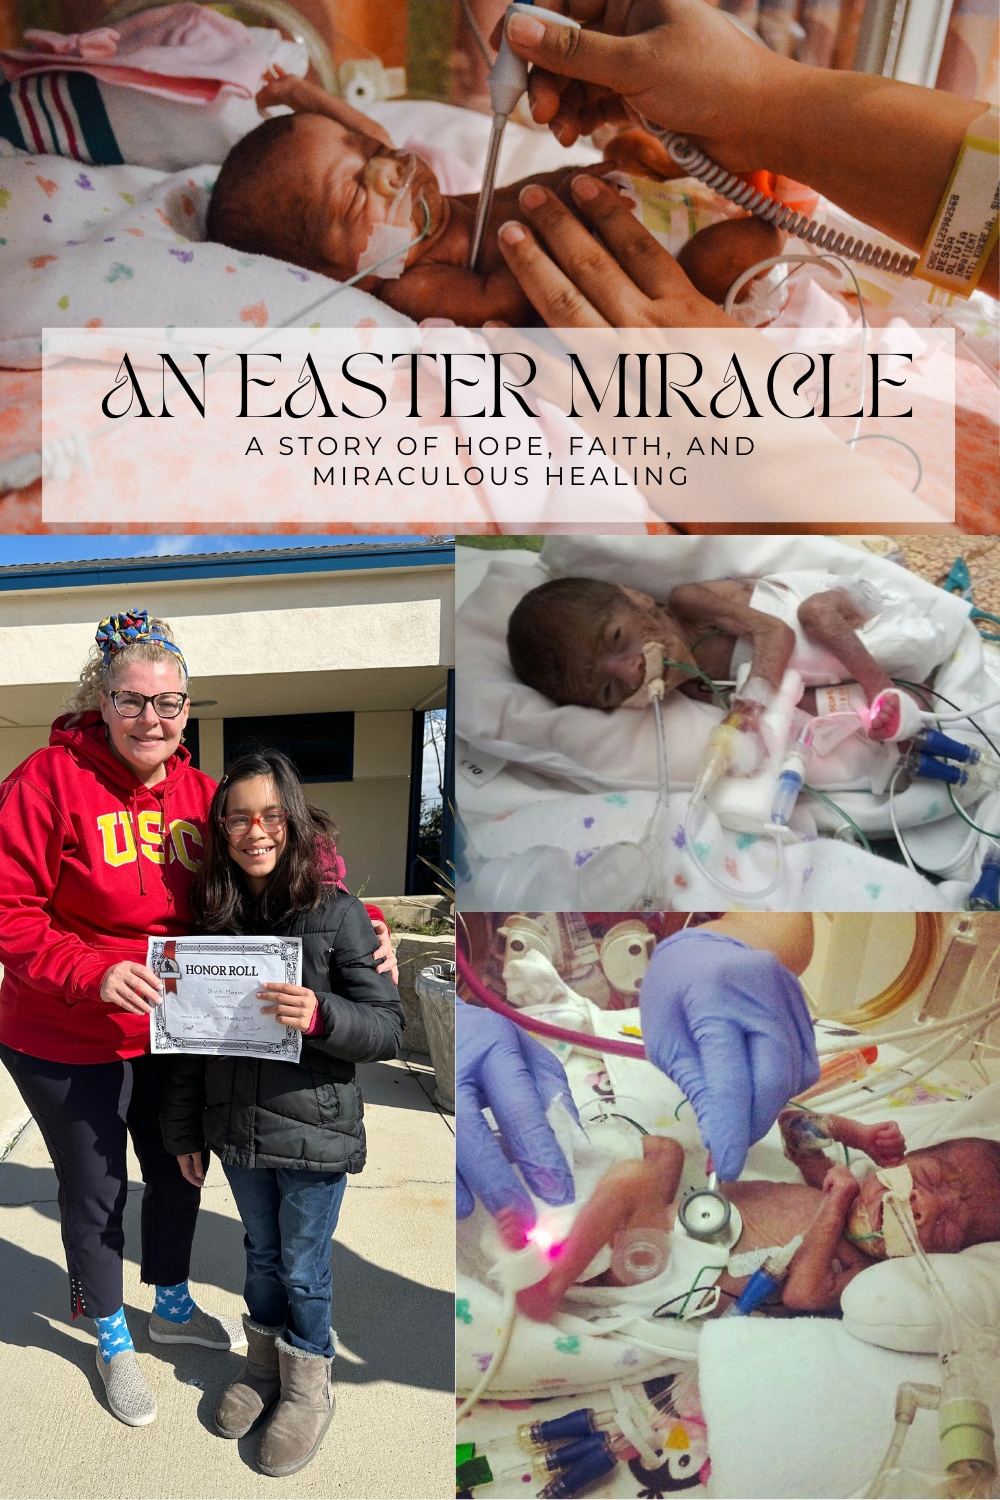 An Easter Miracle: A Story of Hope, Faith, and Miraculous Healing